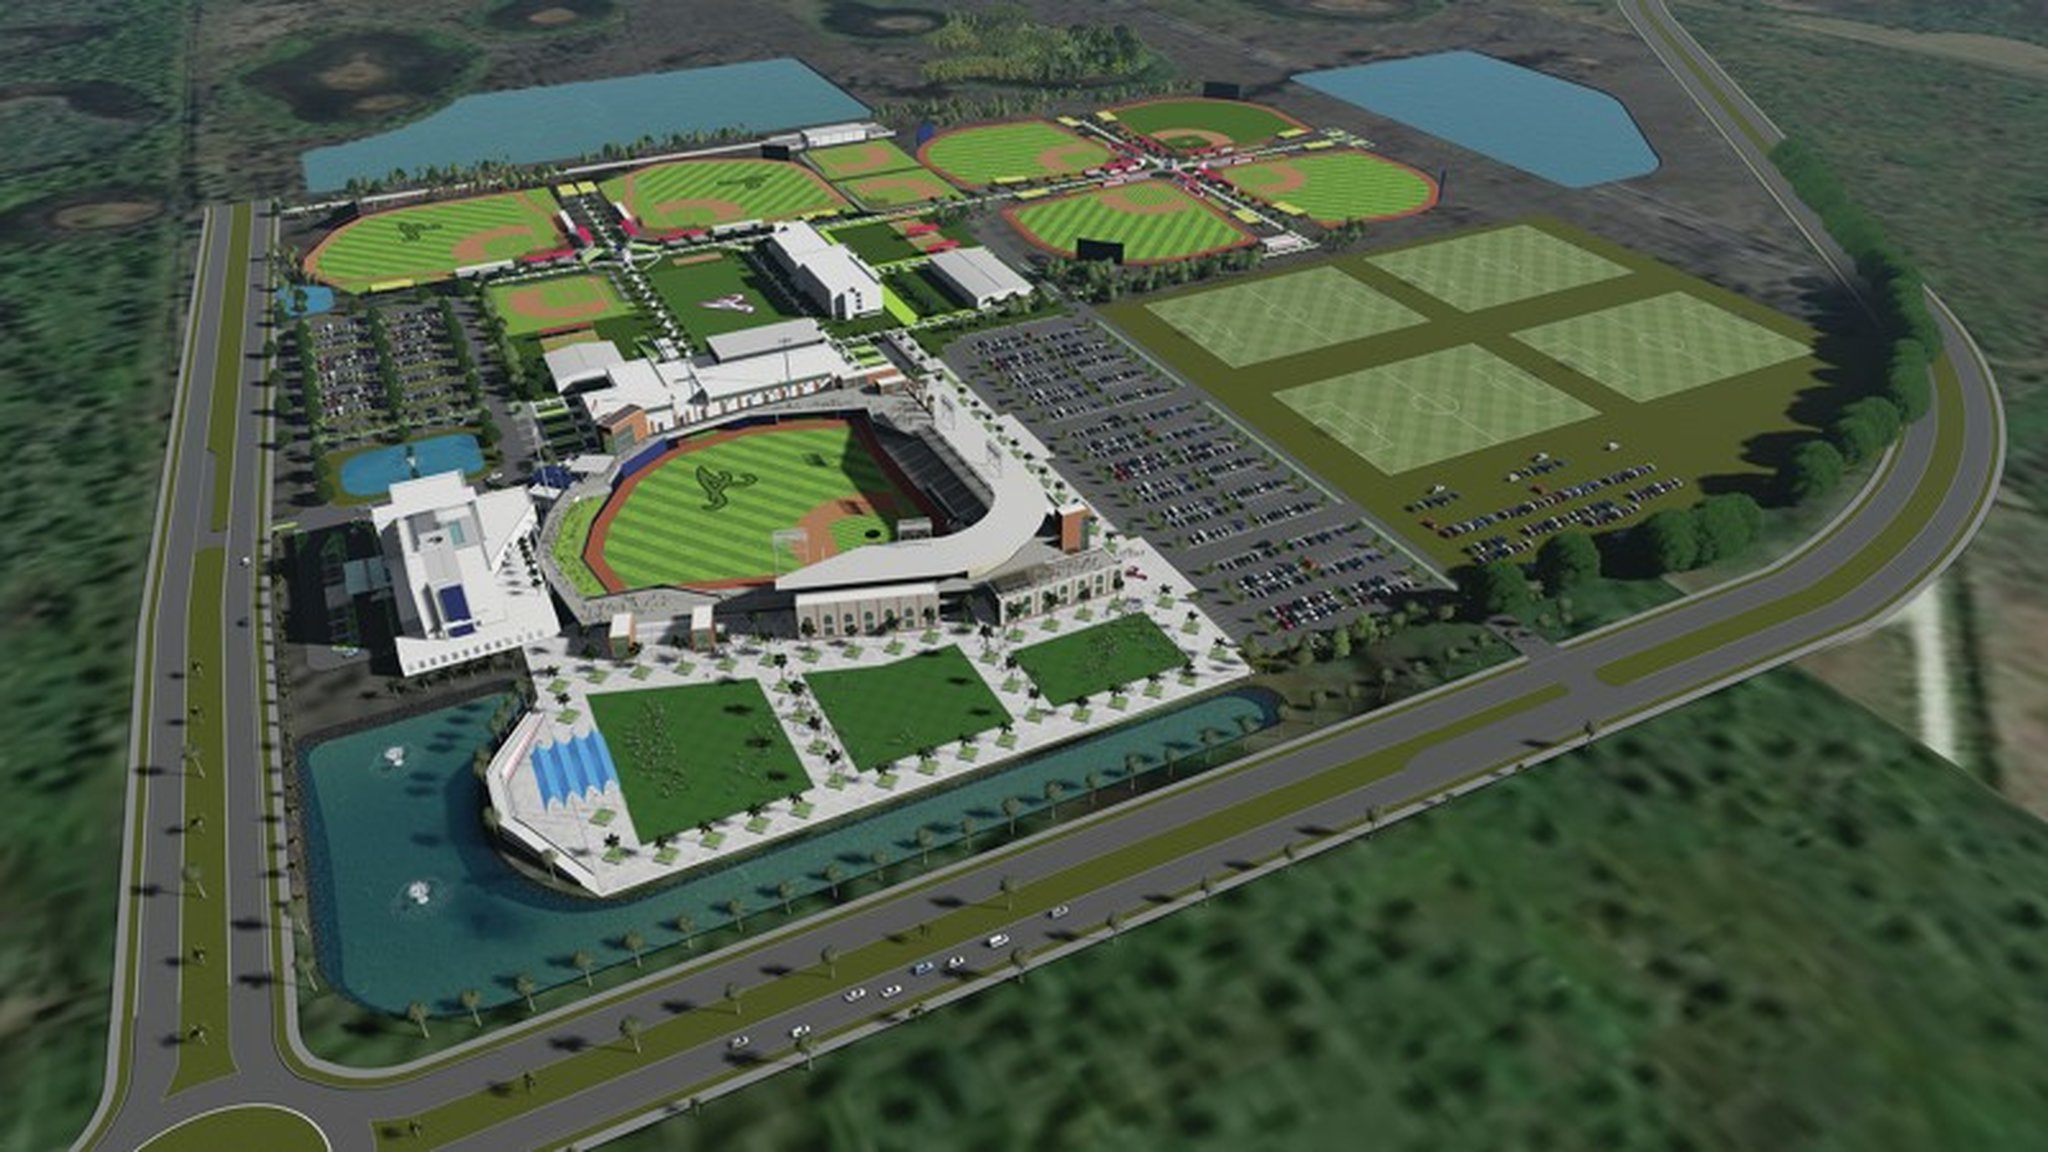 North Port: Getting to know Atlanta Braves' new spring training home